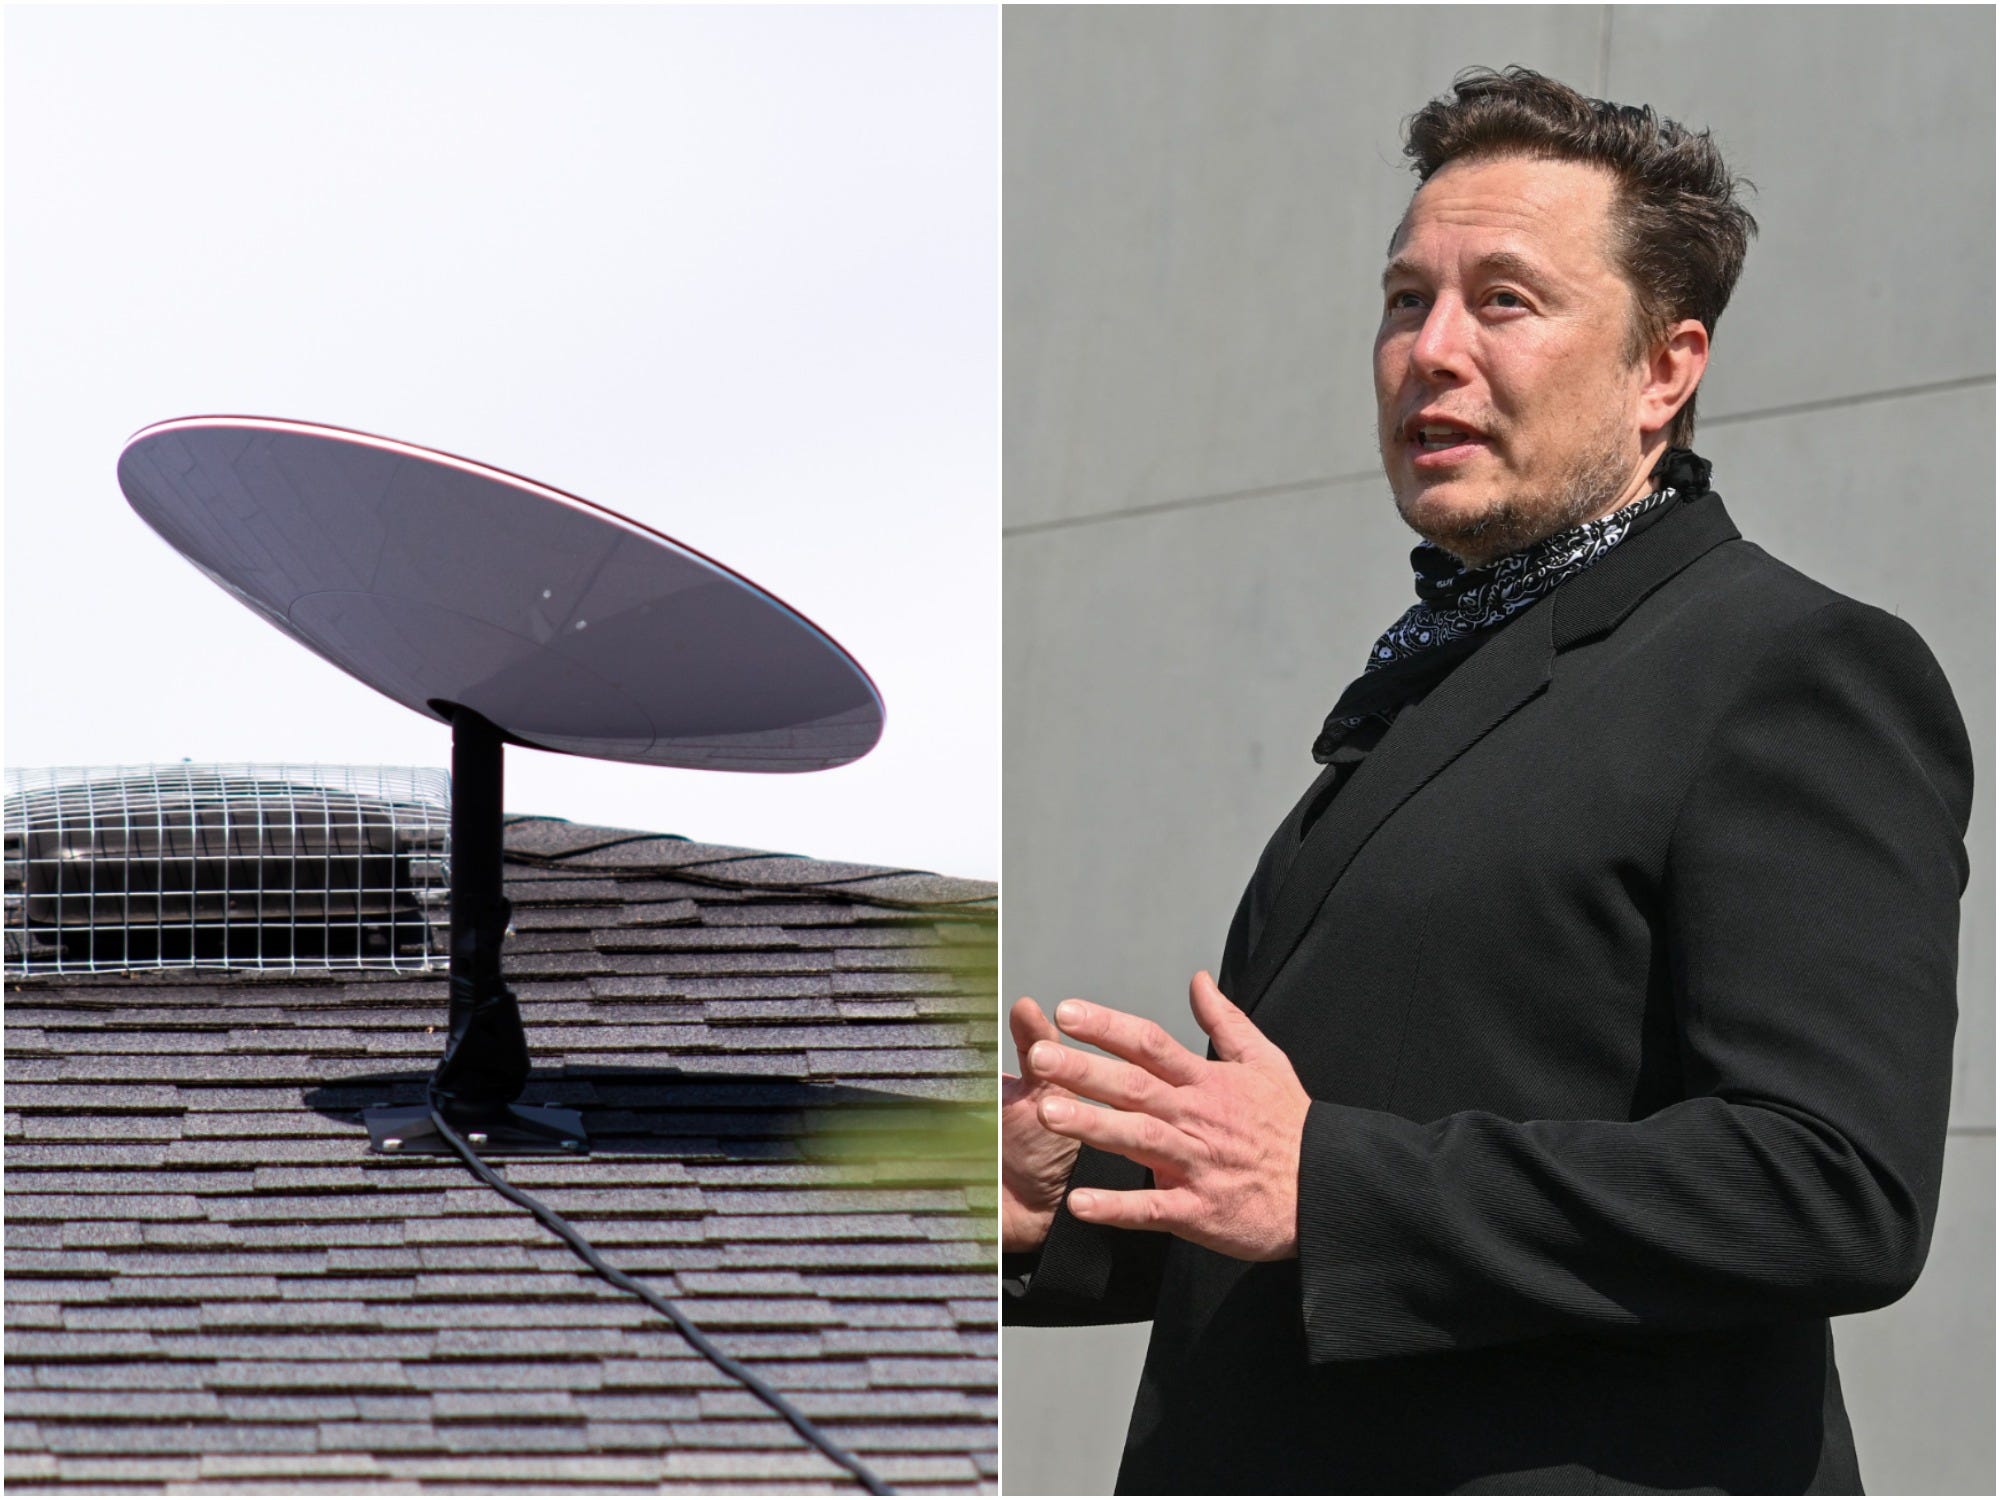 Starlink user terminal on a roof next to a picture of SpaceX CEO Elon Musk